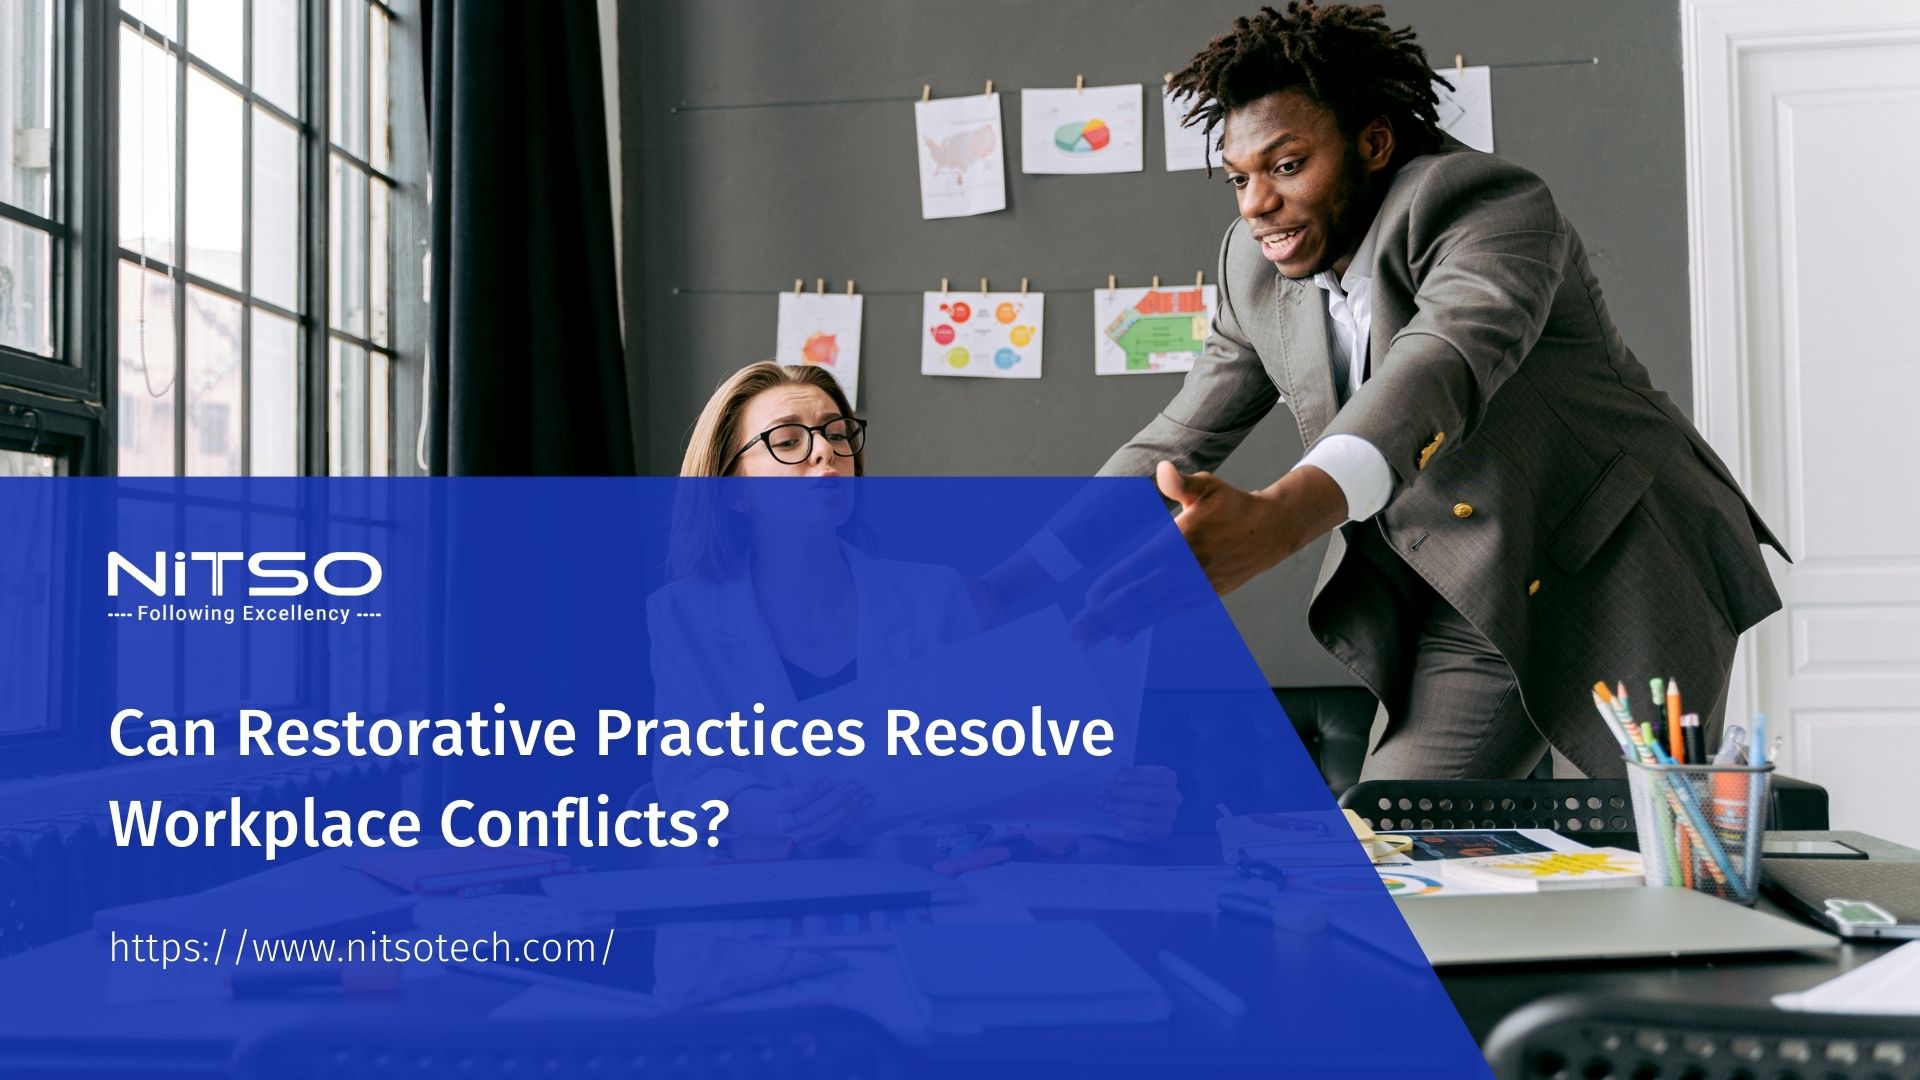 How to Use Restorative Practices for Workplace Conflicts?